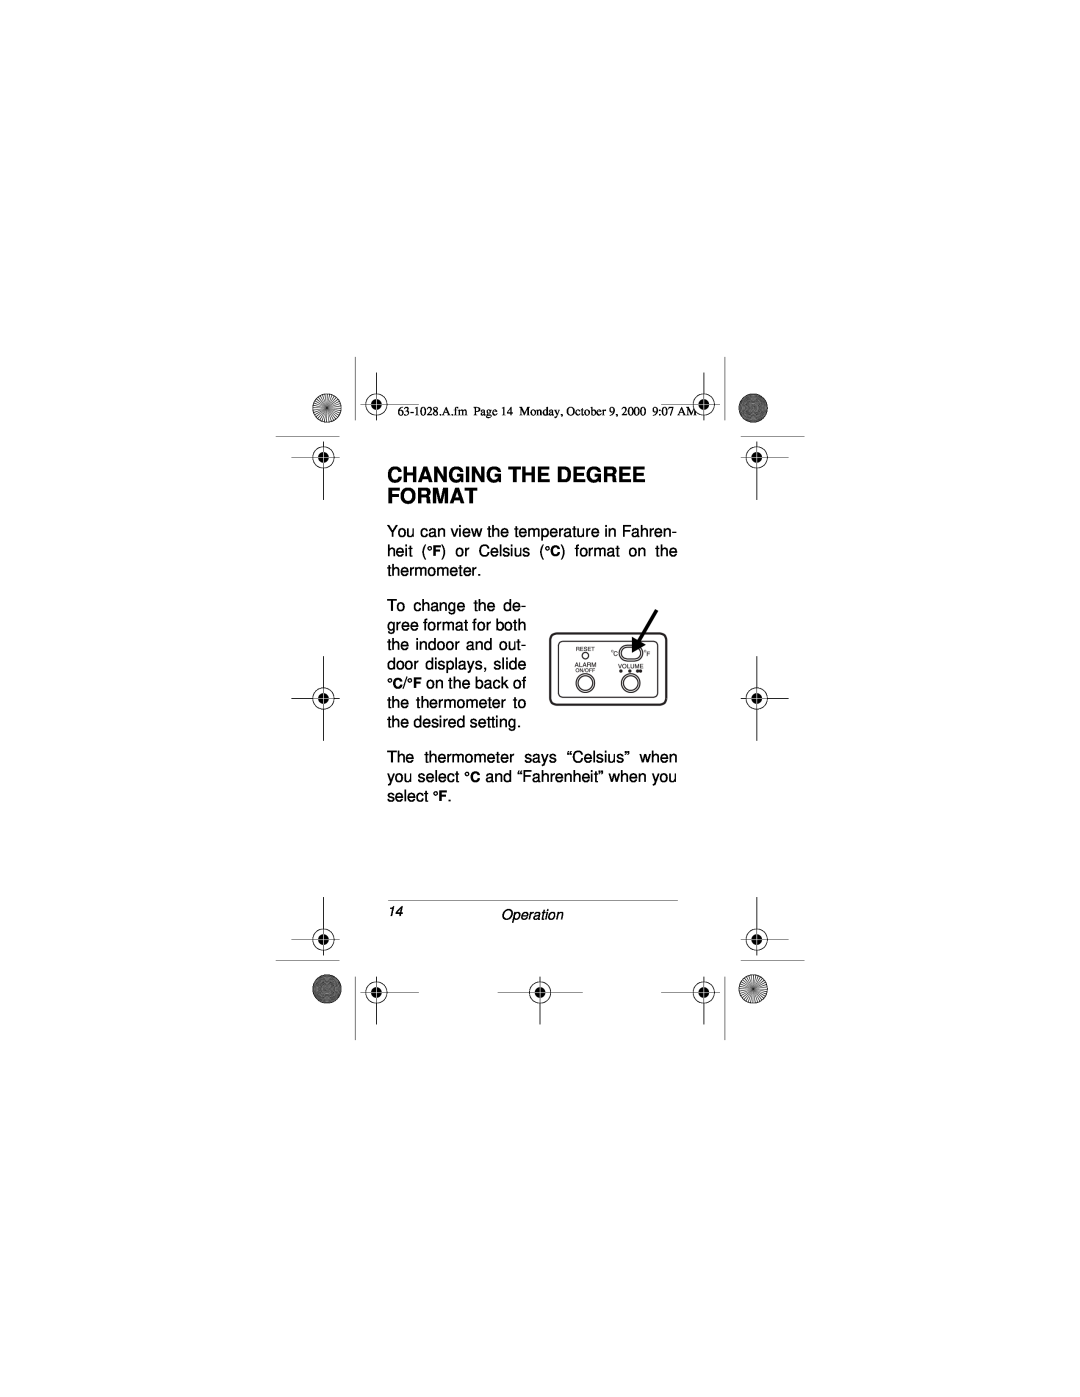 Radio Shack 63-1028 owner manual Changing The Degree Format 